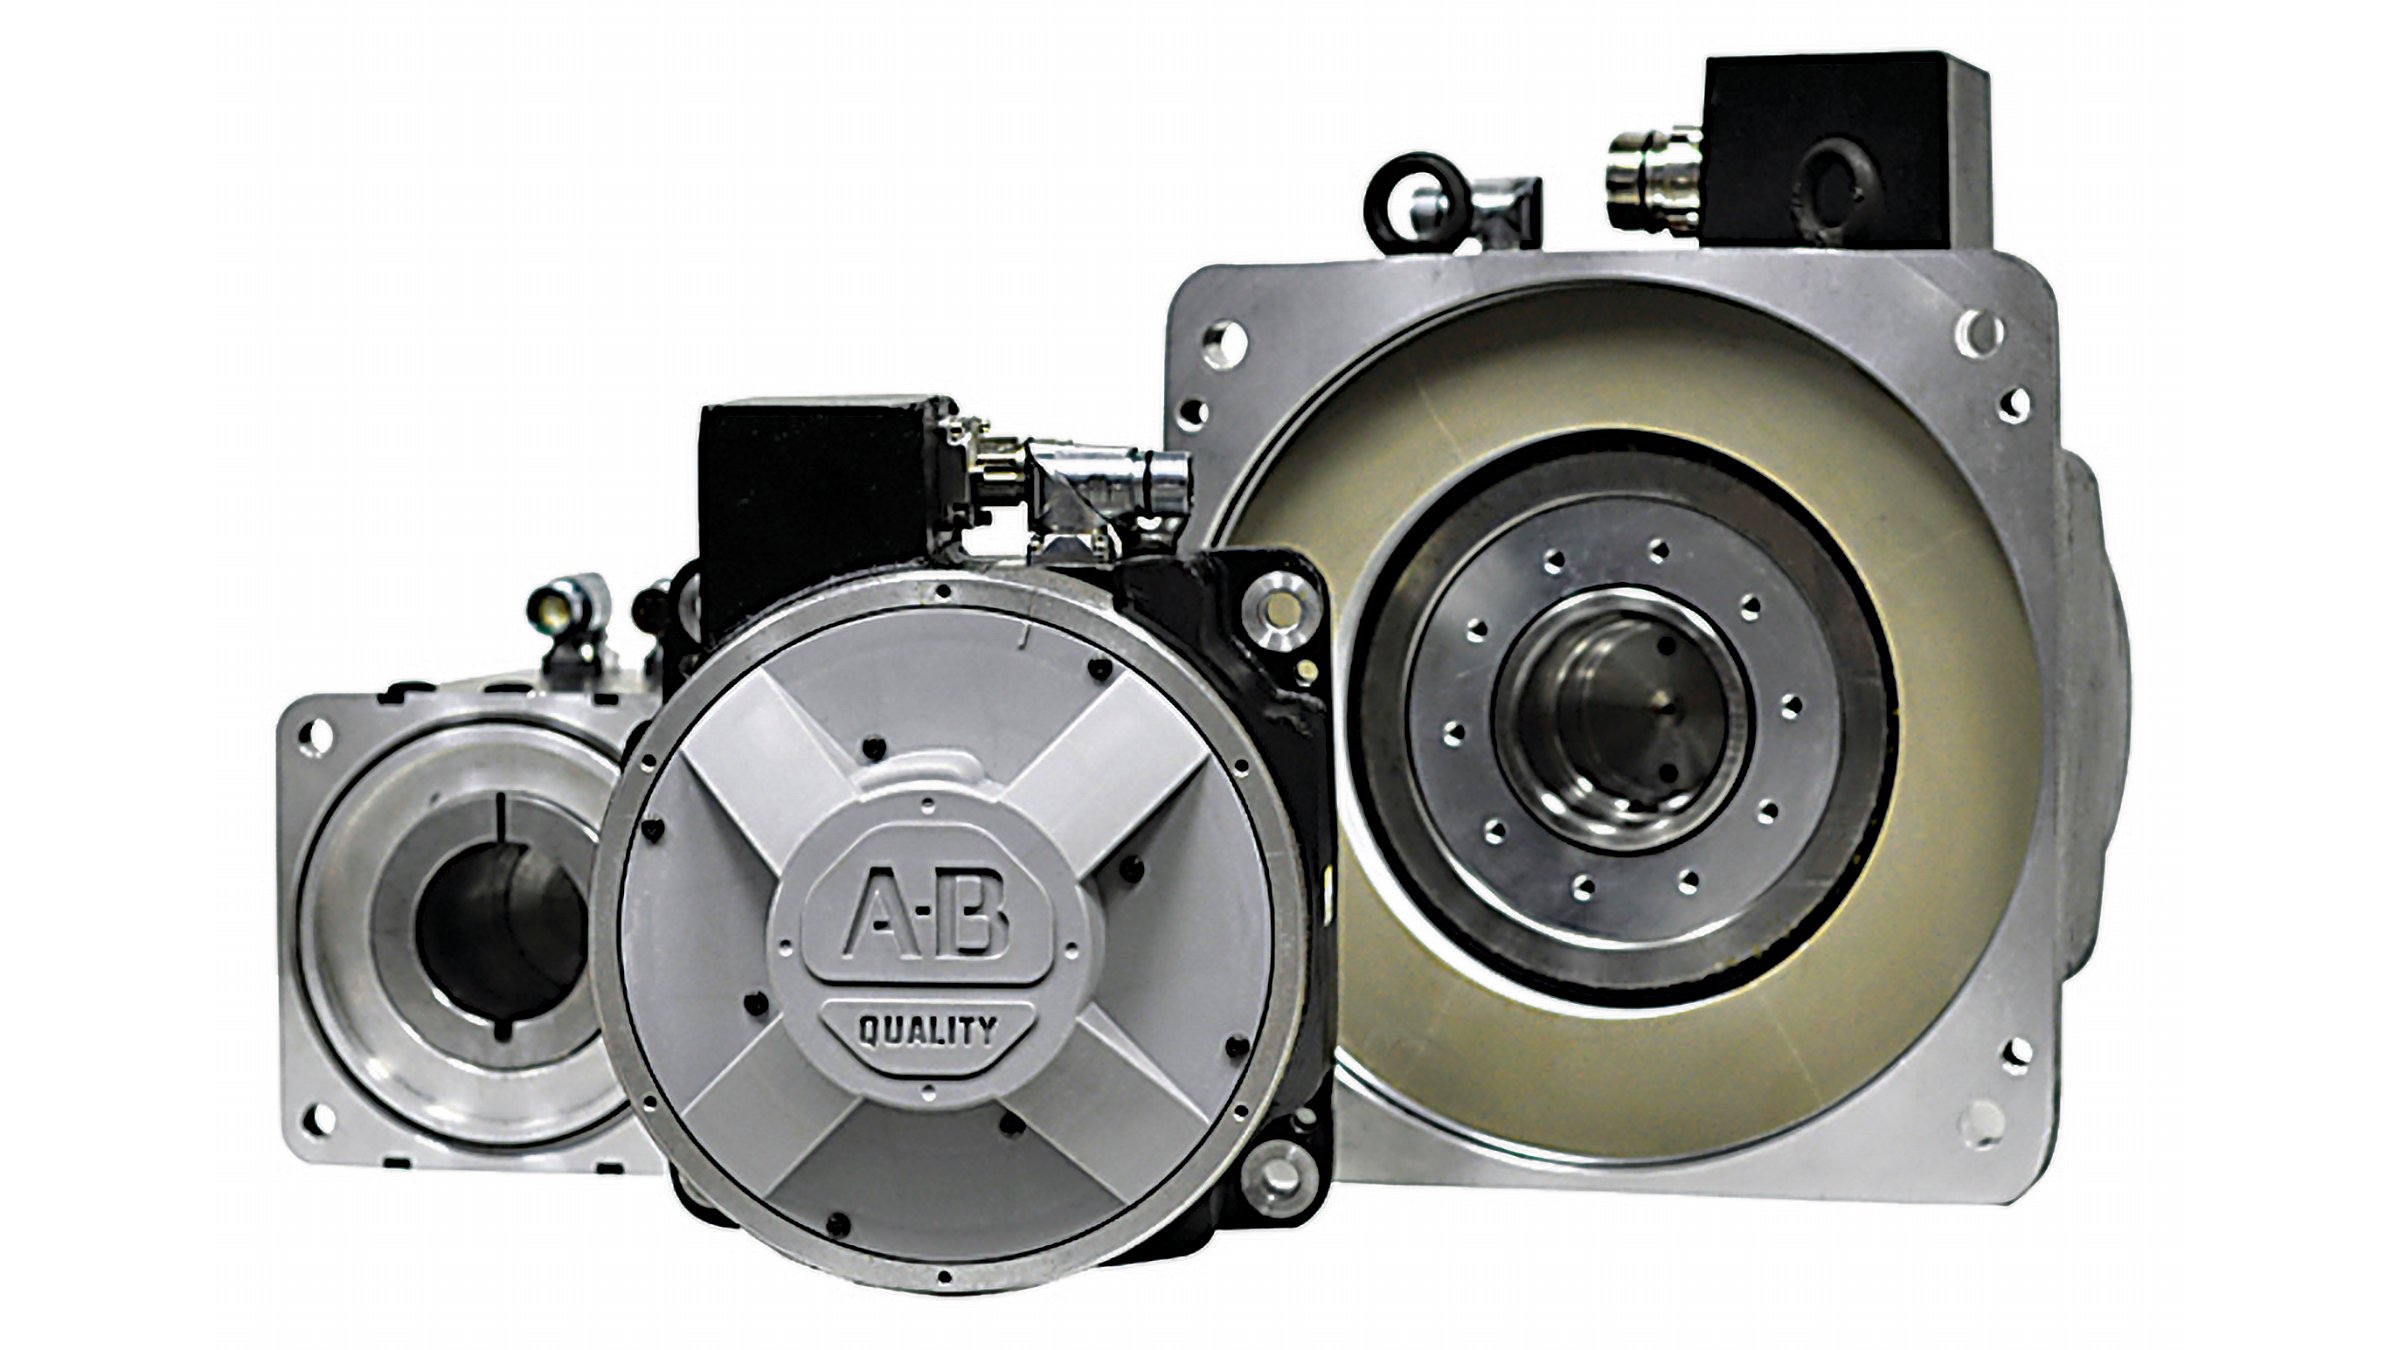 Allen‑Bradley Kinetix® RDD-Series™ Direct Drive Servo Motors connect directly to the load, eliminating the need for gearboxes, timing belts, pulleys and other mechanical components.